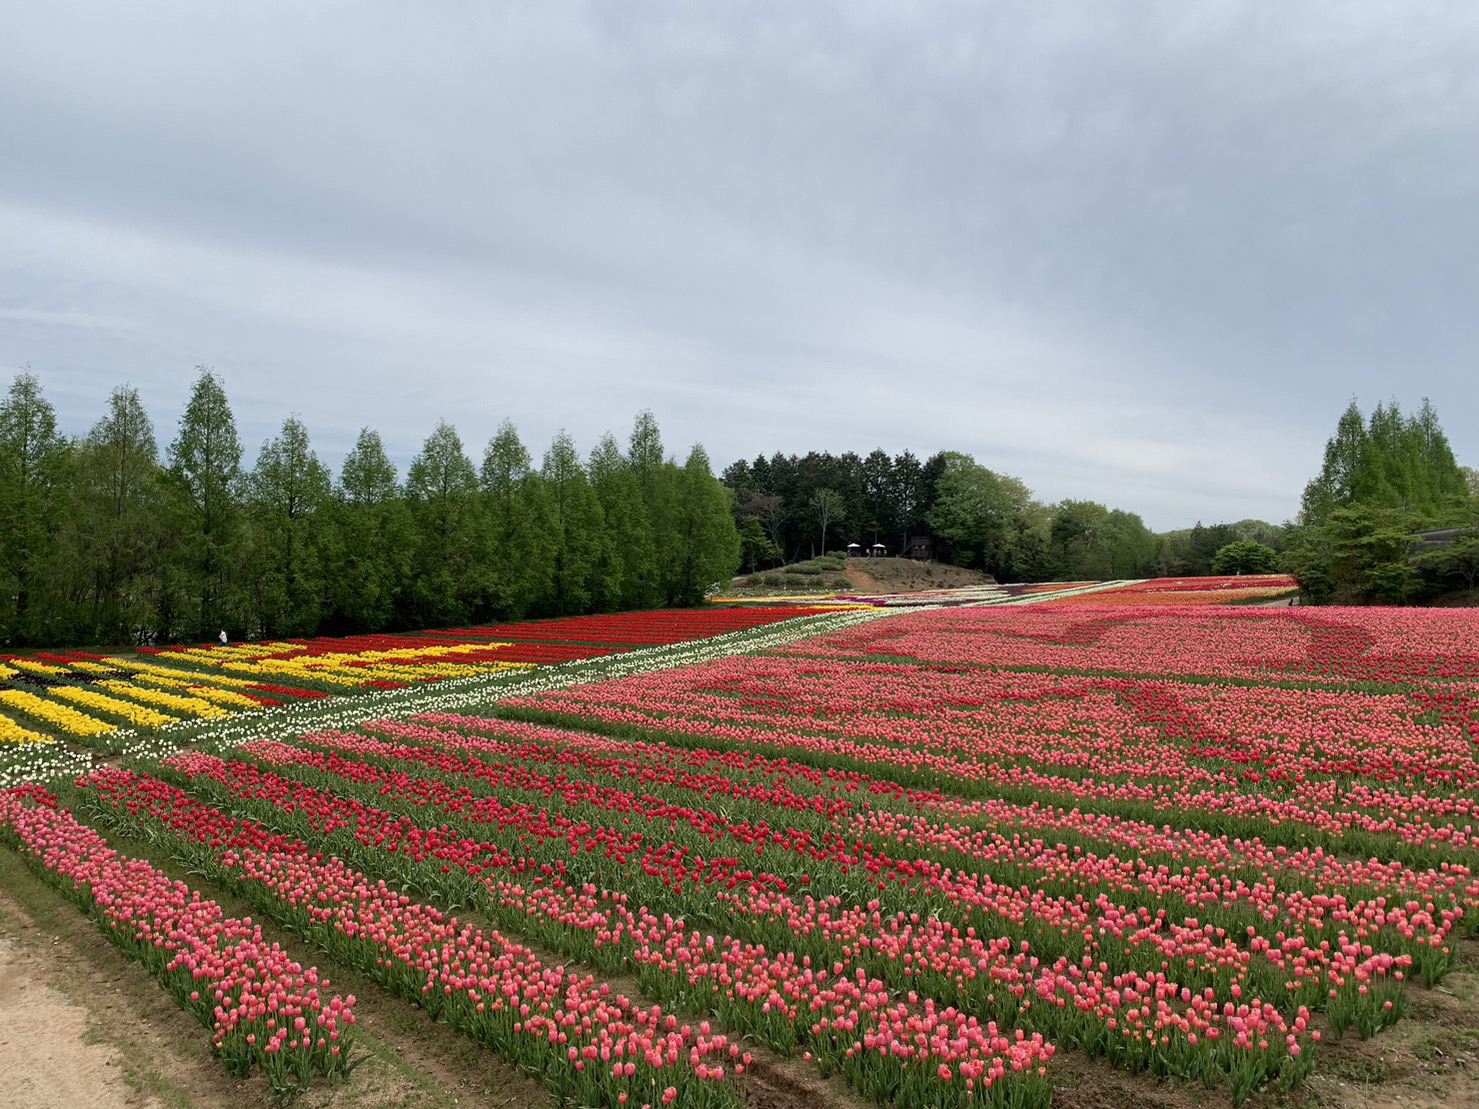 This is information published on April 26th (Fri.) on the flowering of Tulip.